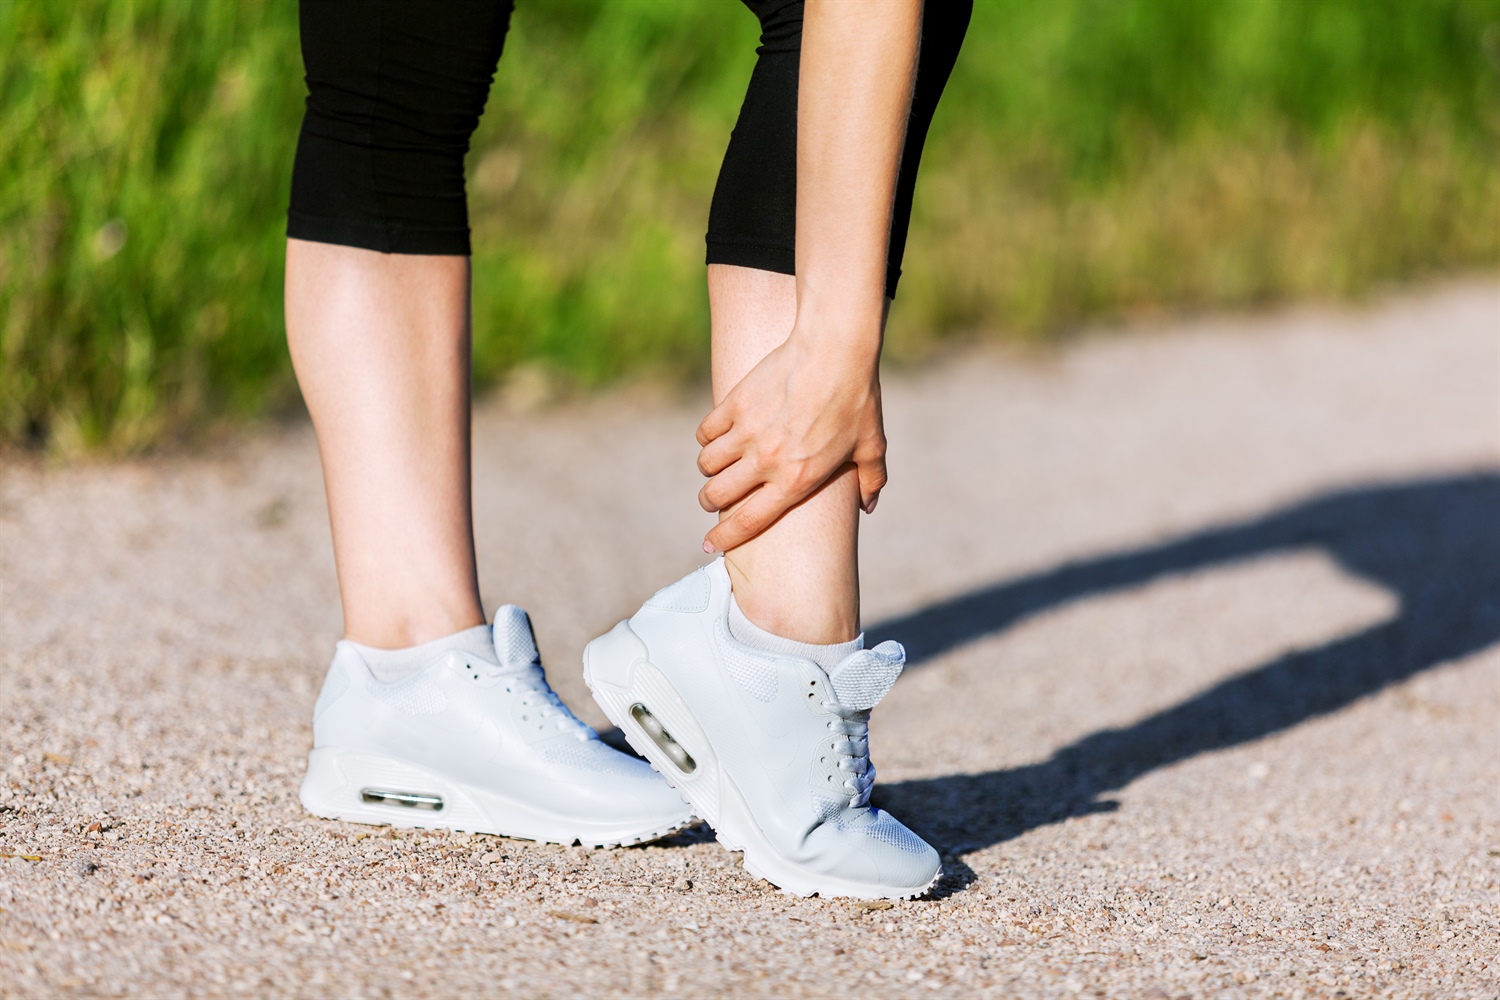 Best Treatments For a Sprained Ankle - HeadlinePlus Press Release ...